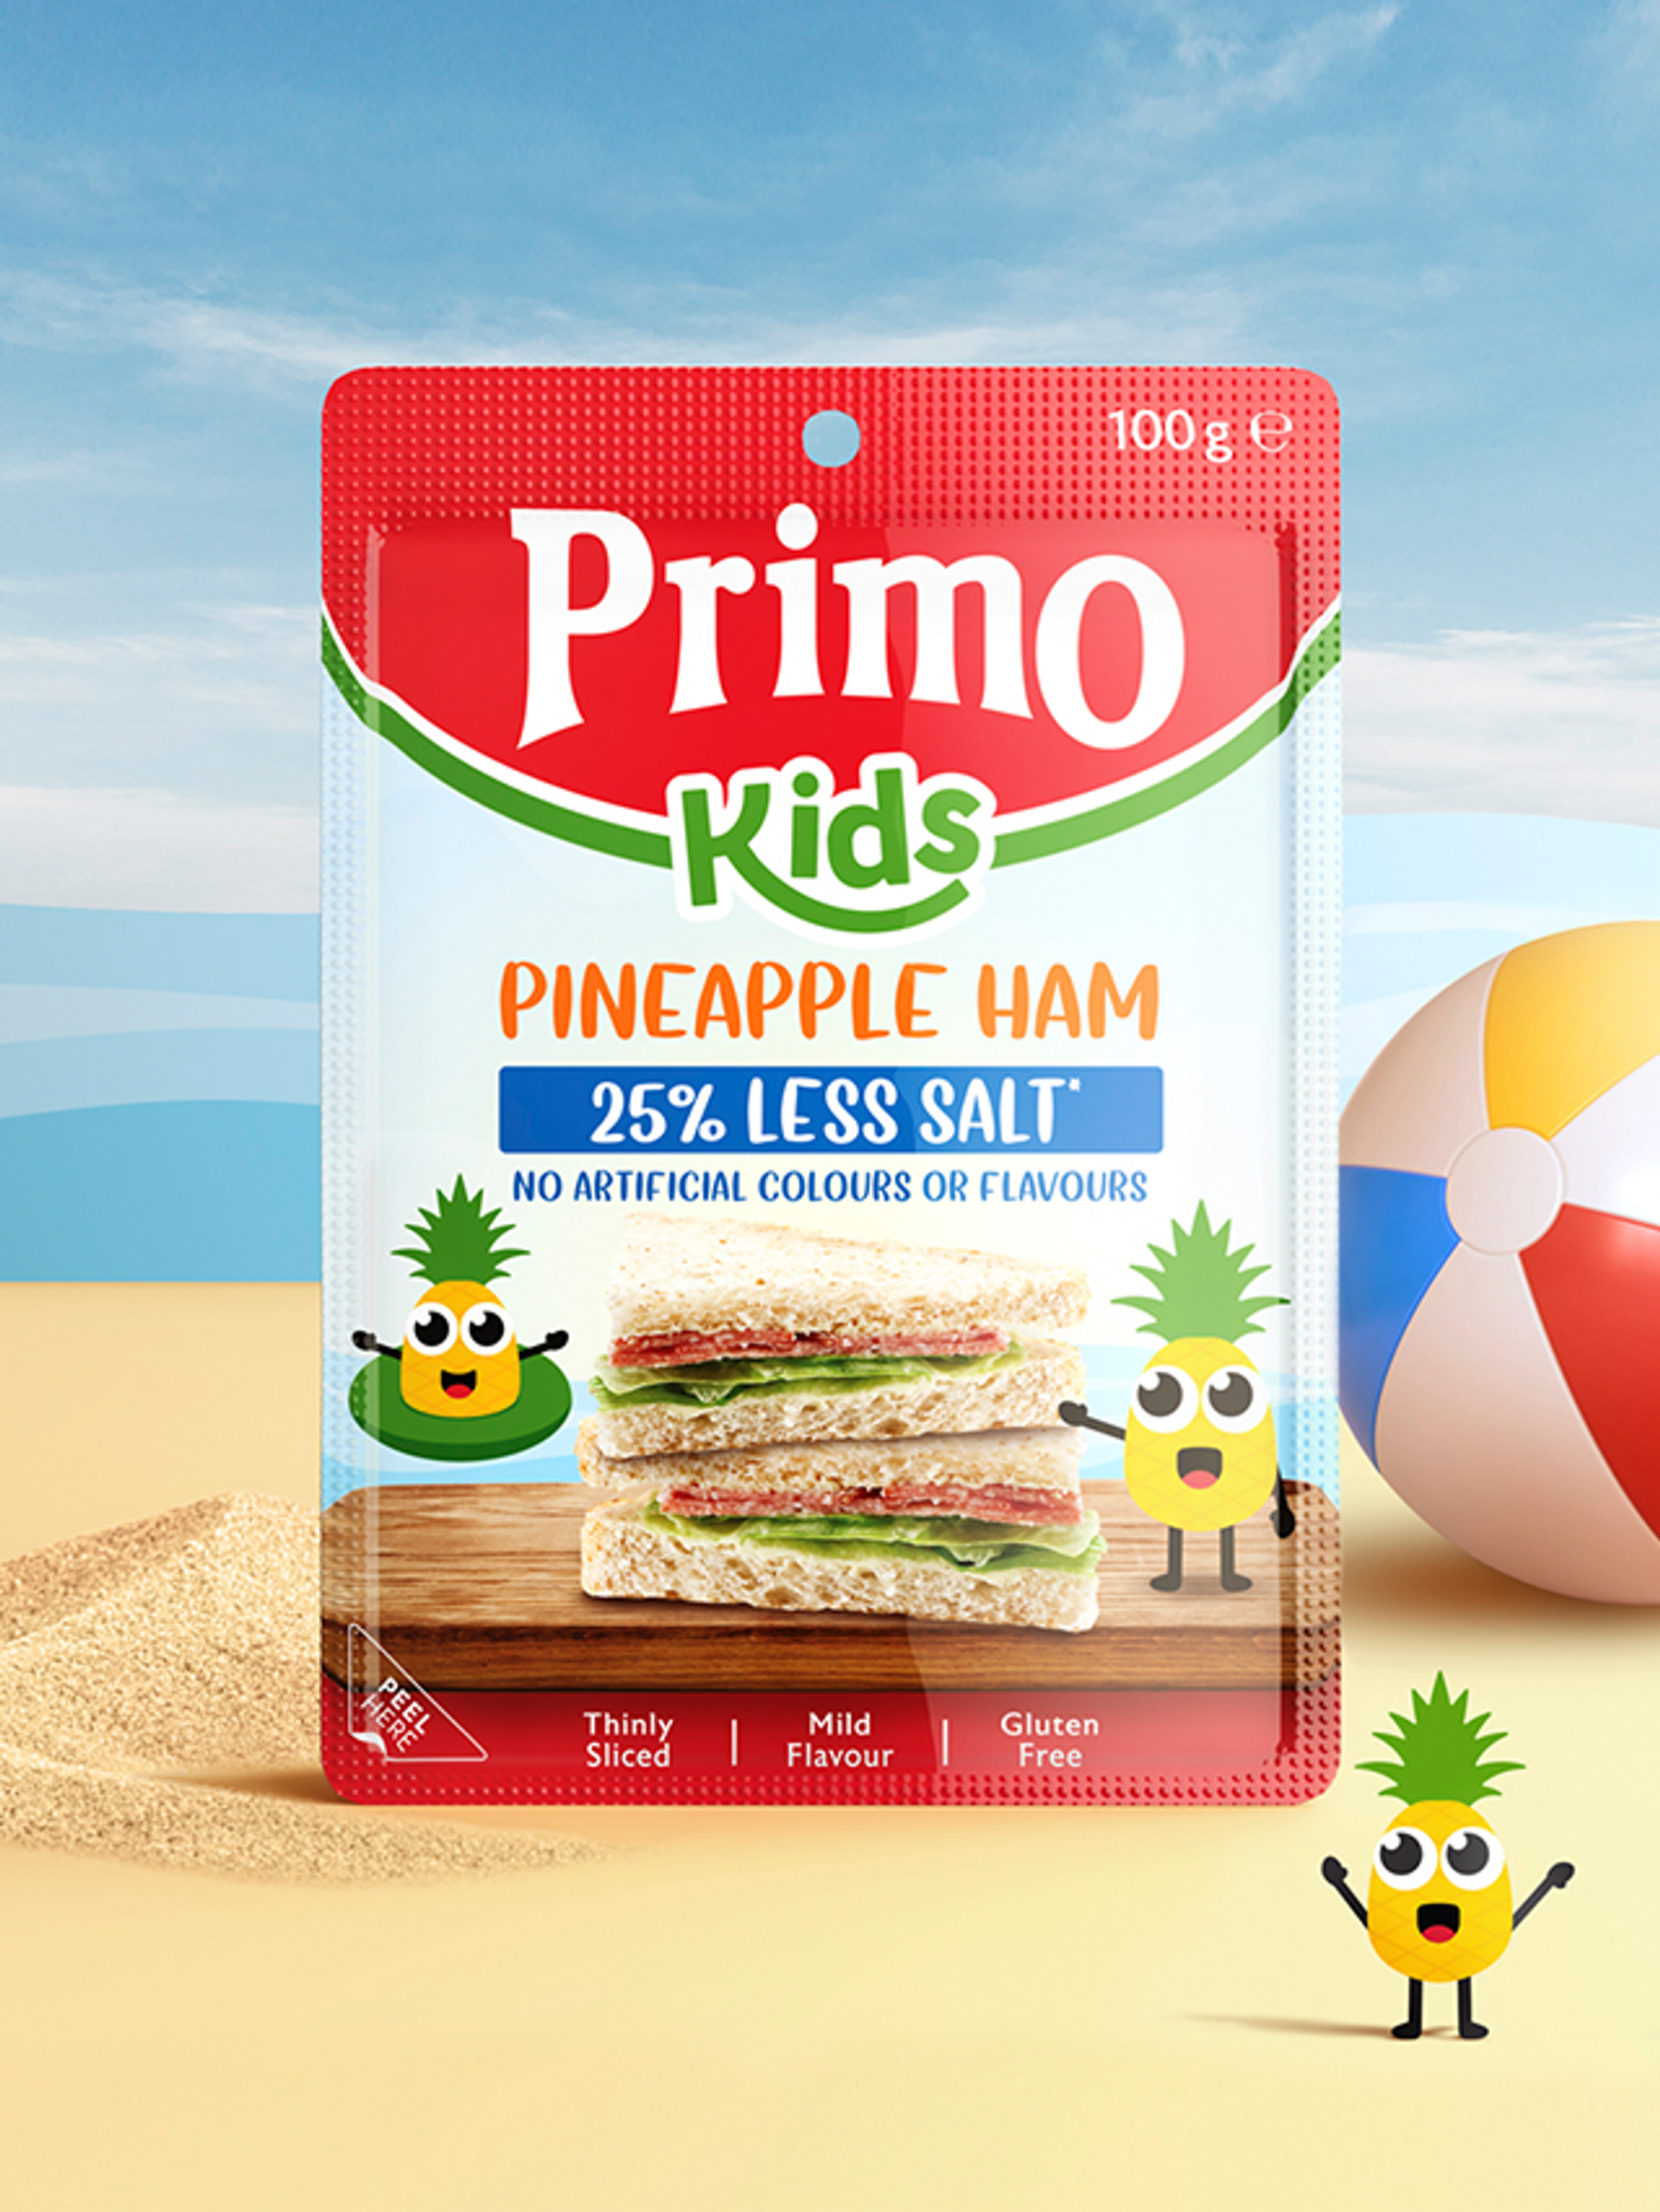 Packaging design for meat brand Primo Kids Pineapple Ham packaging design by Our Revolution featuring an illustrated pineapple character on the beach